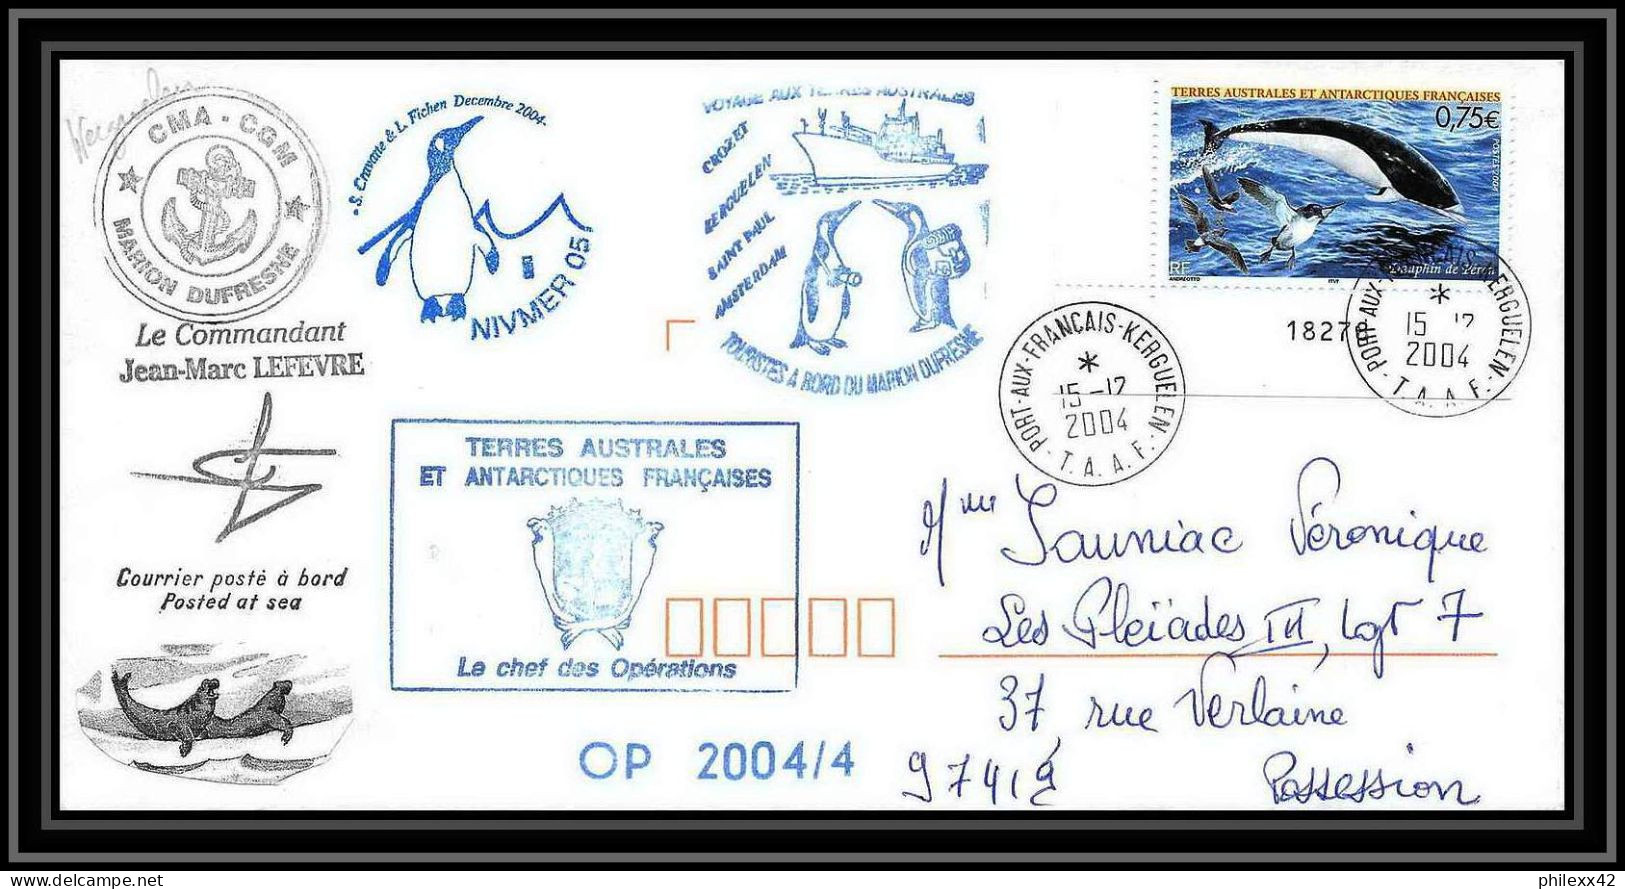 2477 ANTARCTIC Terres Australes TAAF Lettre Cover Dufresne 2 Signé Signed OP 2004/4 N°385 Possession Reunion Dauphin - Antarctic Expeditions